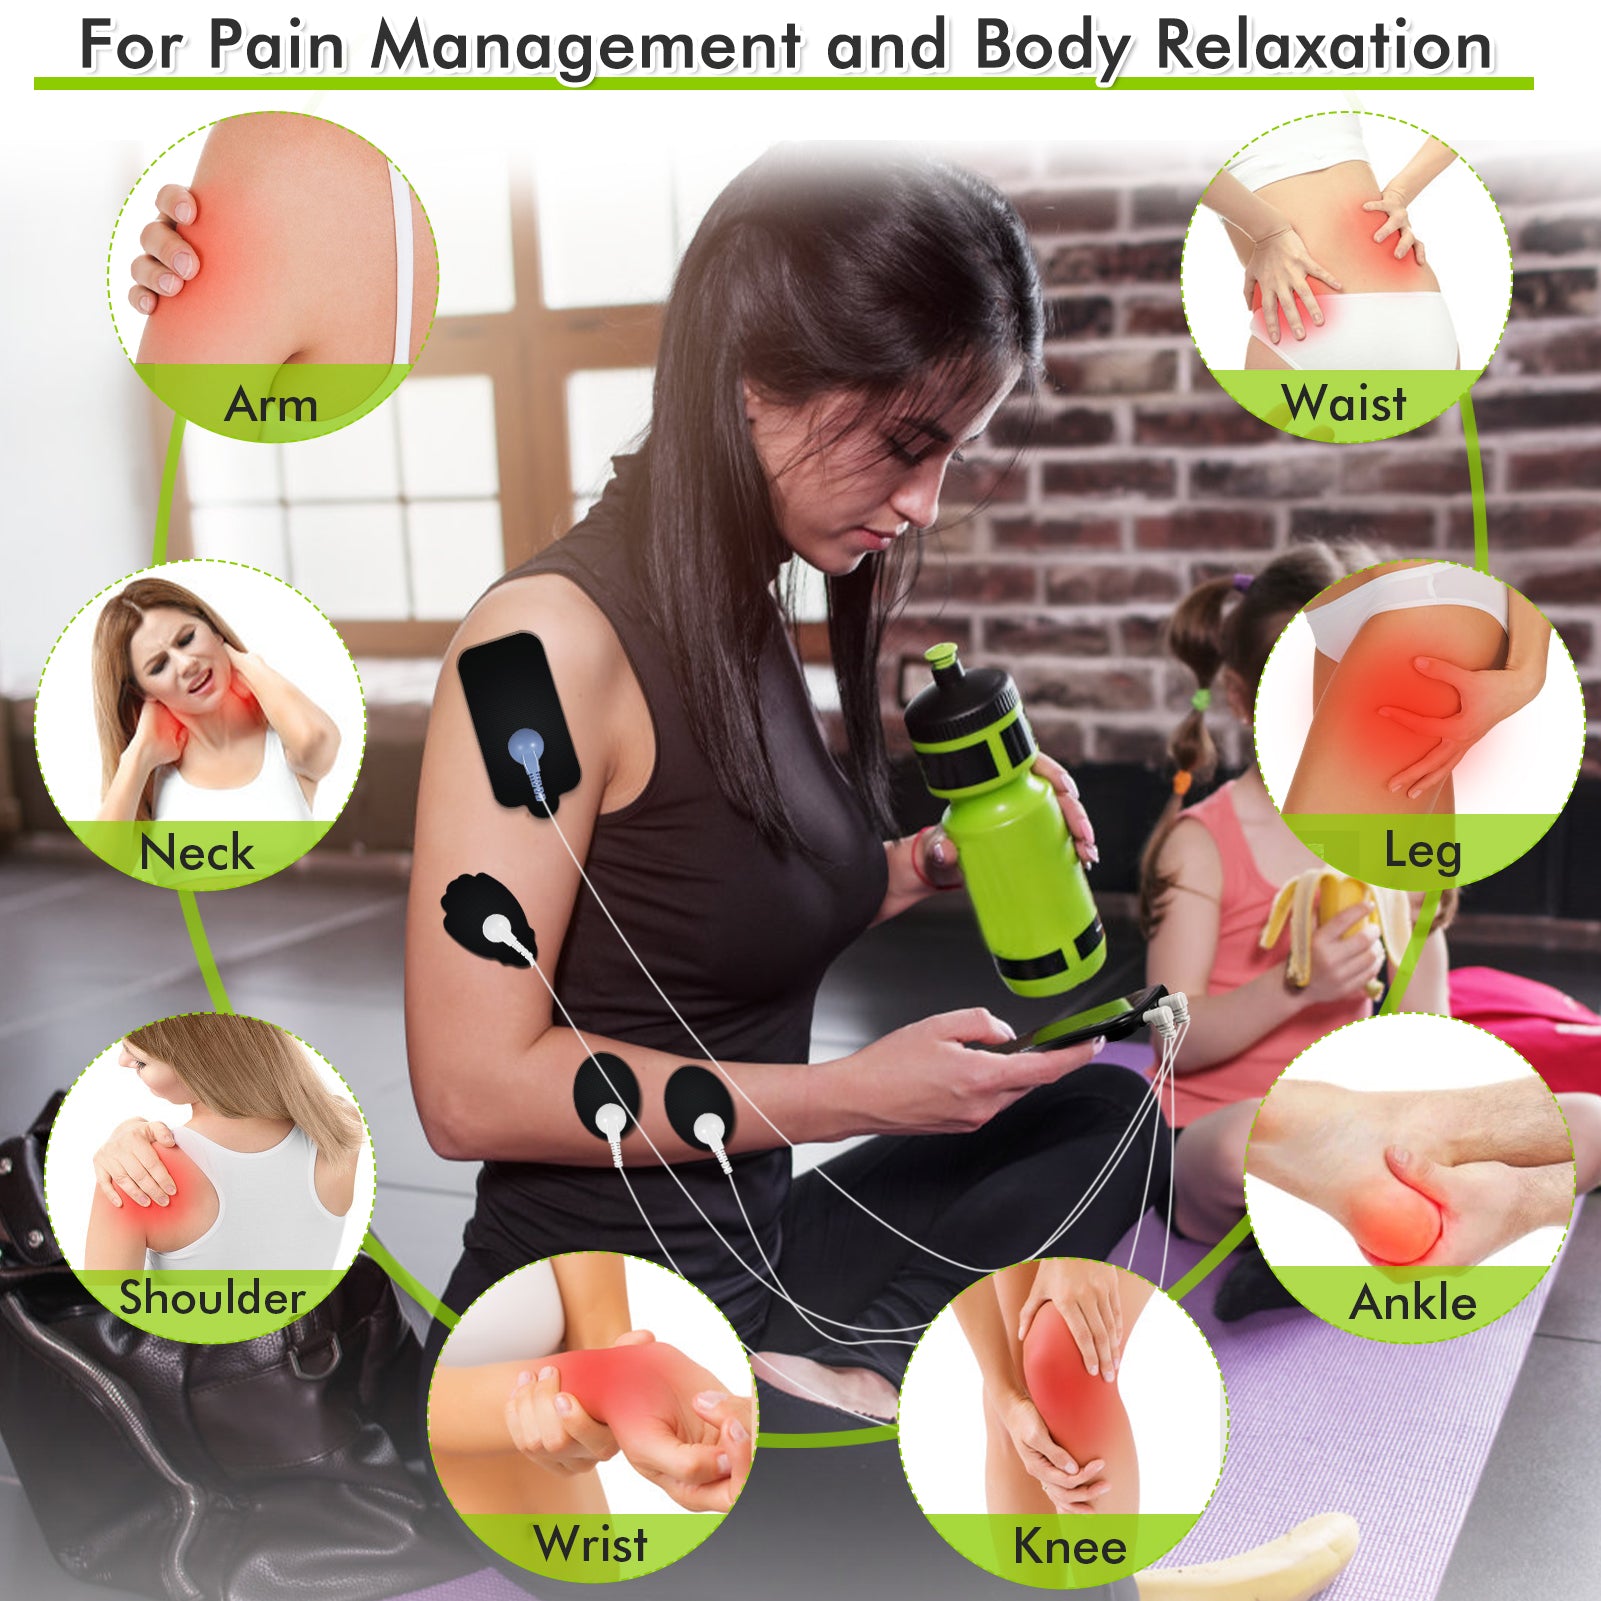 Belifu Tens Unit Massager Pain Relief Therapy SM9126 Muscle